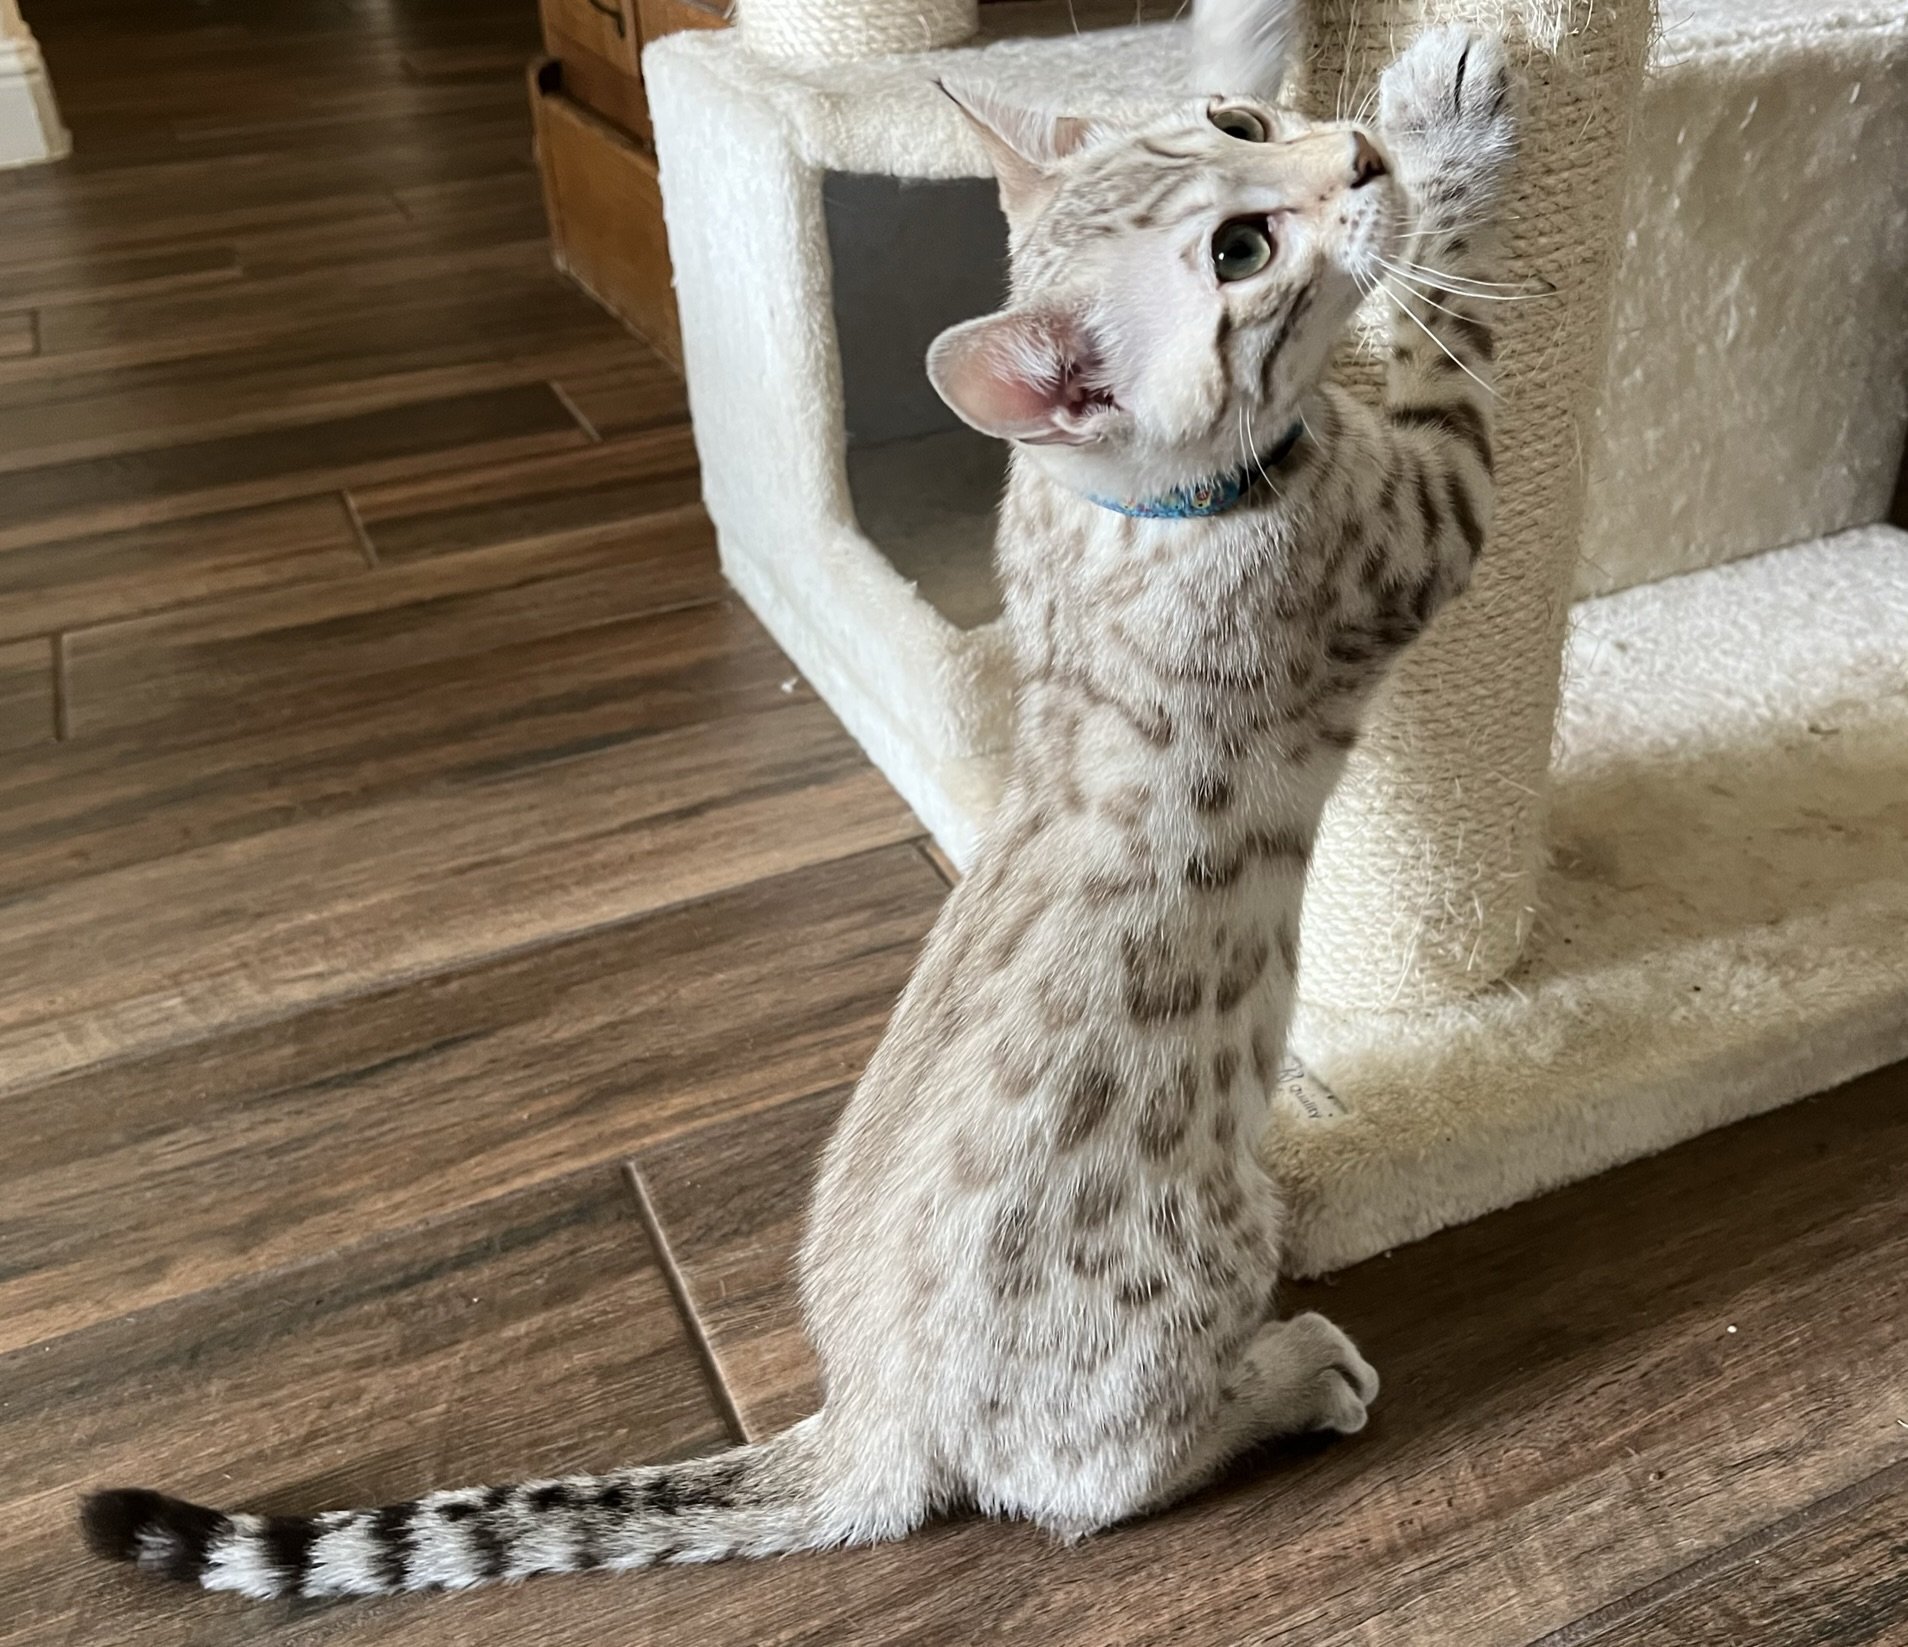 A Bengal cat indulging in its feline passion with a scratching post.